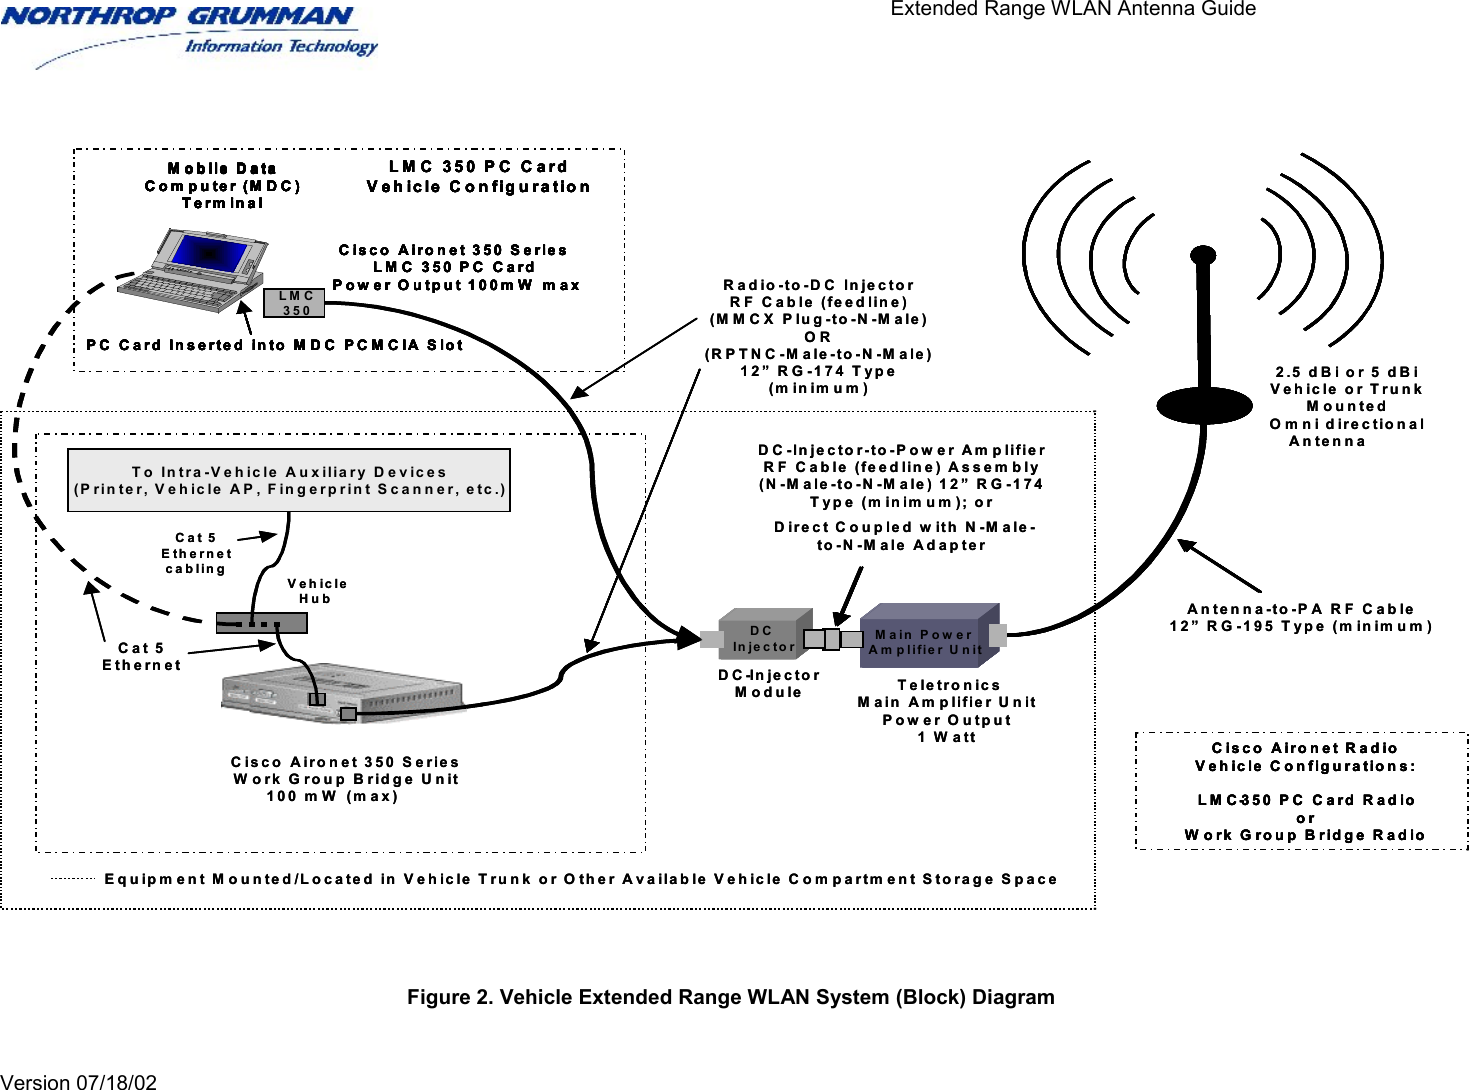                                       Extended Range WLAN Antenna Guide   Version 07/18/02       Figure 2. Vehicle Extended Range WLAN System (Block) Diagram 2.5 dBi or 5 dBiVehicle or TrunkMountedOmni directionalA n te n n a       DC In je c to rDC-Injector ModuleM a in  P ow e r A m plifier U n itTo Intra-V e h ic le  A u xiliary D e vices(Printer, Vehicle AP, Fingerprint Scanner, etc.)P C  C a rd  In serted  in to  M D C  P C M C IA S lo tM o b ile D ata  Computer (MDC) TerminalLMC350C isco  A iro n et 350  S e ries               LM C  350  P C  C ard             Pow er Output 100mW  m axLM C 350 PC Card Vehicle ConfigurationCisco Aironet Radio Vehicle Configurations:LM C-350 PC Card RadioorW ork Group Bridge RadioRadio-to-DC InjectorRF Cable (feedline)(M M C X  P lug -to -N -M ale)OR(R P TN C -M ale-to -N -M ale)12” RG-174 Type(m in im u m )Equipm ent Mounted/Located in Vehicle Trunk or Other Available Vehicle Com partment Storage SpaceTeletro n ic sM ain  Am plifier U n itPower Output1 W attDC In je c to rM a in  P ow e r A m plifier U n itAn tenna-to-P A  R F  C able12”  R G -1 95 T yp e  (m in im um )DC In je c to rM a in  P ow e r A m plifier U n itCat 5 Ethernet To Intra-V e h ic le  A u xiliary D e vices(Printer, Vehicle AP, Fingerprint Scanner, etc.)Cisco Aironet 350 SeriesW ork Group Bridge Unit100 mW  (m ax)     To  In tra-V ehicle A u xiliary D evices(Printer, Vehicle AP, Fingerprint Scanner, etc.)VehicleHub P C  C a rd  In serted  in to  M D C  P C M C IA S lo tM o b ile D ata  Computer (MDC) TerminalLMC350C isco  A iro n et 350  S e ries               LM C  350  P C  C ard             Pow er Output 100mW  m axLM C 350 PC Card Vehicle ConfigurationP C  C a rd  In serted  in to  M D C  P C M C IA S lo tM o b ile D ata  Computer (MDC) TerminalM o b ile D ata  Computer (MDC) TerminalLMC350C isco  A iro n et 350  S e ries               LM C  350  P C  C ard             Pow er Output 100mW  m axLM C 350 PC Card Vehicle ConfigurationCisco Aironet Radio Vehicle Configurations:LM C-350 PC Card RadioorW ork Group Bridge RadioD C -Injecto r-to -P o w er Am p lifier RF Cable (feedline) Assem bly (N -M ale-to -N -M ale) 12” R G -174 T ype (m in im u m ); o rDirect Coupled with N-Male-to-N -M ale Adap terCat 5 Ethernet c a blin g2.5 dBi or 5 dBiVehicle or TrunkMountedOmni directionalA n te n n a       DC In je c to rDC-Injector ModuleM a in  P ow e r A m plifier U n itTo Intra-V e h ic le  A u xiliary D e vices(Printer, Vehicle AP, Fingerprint Scanner, etc.)P C  C a rd  In serted  in to  M D C  P C M C IA S lo tM o b ile D ata  Computer (MDC) TerminalLMC350C isco  A iro n et 350  S e ries               LM C  350  P C  C ard             Pow er Output 100mW  m axLM C 350 PC Card Vehicle ConfigurationP C  C a rd  In serted  in to  M D C  P C M C IA S lo tM o b ile D ata  Computer (MDC) TerminalM o b ile D ata  Computer (MDC) TerminalLMC350C isco  A iro n et 350  S e ries               LM C  350  P C  C ard             Pow er Output 100mW  m axLM C 350 PC Card Vehicle ConfigurationCisco Aironet Radio Vehicle Configurations:LM C-350 PC Card RadioorW ork Group Bridge RadioRadio-to-DC InjectorRF Cable (feedline)(M M C X  P lug -to -N -M ale)OR(R P TN C -M ale-to -N -M ale)12” RG-174 Type(m in im u m )Equipm ent Mounted/Located in Vehicle Trunk or Other Available Vehicle Com partment Storage SpaceTeletro n ic sM ain  Am plifier U n itPower Output1 W attDC In je c to rM a in  P ow e r A m plifier U n itAn tenna-to-P A  R F  C able12”  R G -1 95 T yp e  (m in im um )DC In je c to rM a in  P ow e r A m plifier U n itCat 5 Ethernet To Intra-V e h ic le  A u xiliary D e vices(Printer, Vehicle AP, Fingerprint Scanner, etc.)Cisco Aironet 350 SeriesW ork Group Bridge Unit100 mW  (m ax)     To  In tra-V ehicle A u xiliary D evices(Printer, Vehicle AP, Fingerprint Scanner, etc.)VehicleHub P C  C a rd  In serted  in to  M D C  P C M C IA S lo tM o b ile D ata  Computer (MDC) TerminalM o b ile D ata  Computer (MDC) TerminalLMC350C isco  A iro n et 350  S e ries               LM C  350  P C  C ard             Pow er Output 100mW  m axLM C 350 PC Card Vehicle ConfigurationP C  C a rd  In serted  in to  M D C  P C M C IA S lo tM o b ile D ata  Computer (MDC) TerminalM o b ile D ata  Computer (MDC) TerminalLMC350C isco  A iro n et 350  S e ries               LM C  350  P C  C ard             Pow er Output 100mW  m axLM C 350 PC Card Vehicle ConfigurationCisco Aironet Radio Vehicle Configurations:LM C-350 PC Card RadioorW ork Group Bridge RadioD C -Injecto r-to -P o w er Am p lifier RF Cable (feedline) Assem bly (N -M ale-to -N -M ale) 12” R G -174 T ype (m in im u m ); o rDirect Coupled with N-Male-to-N -M ale Adap terCat 5 Ethernet c a blin g